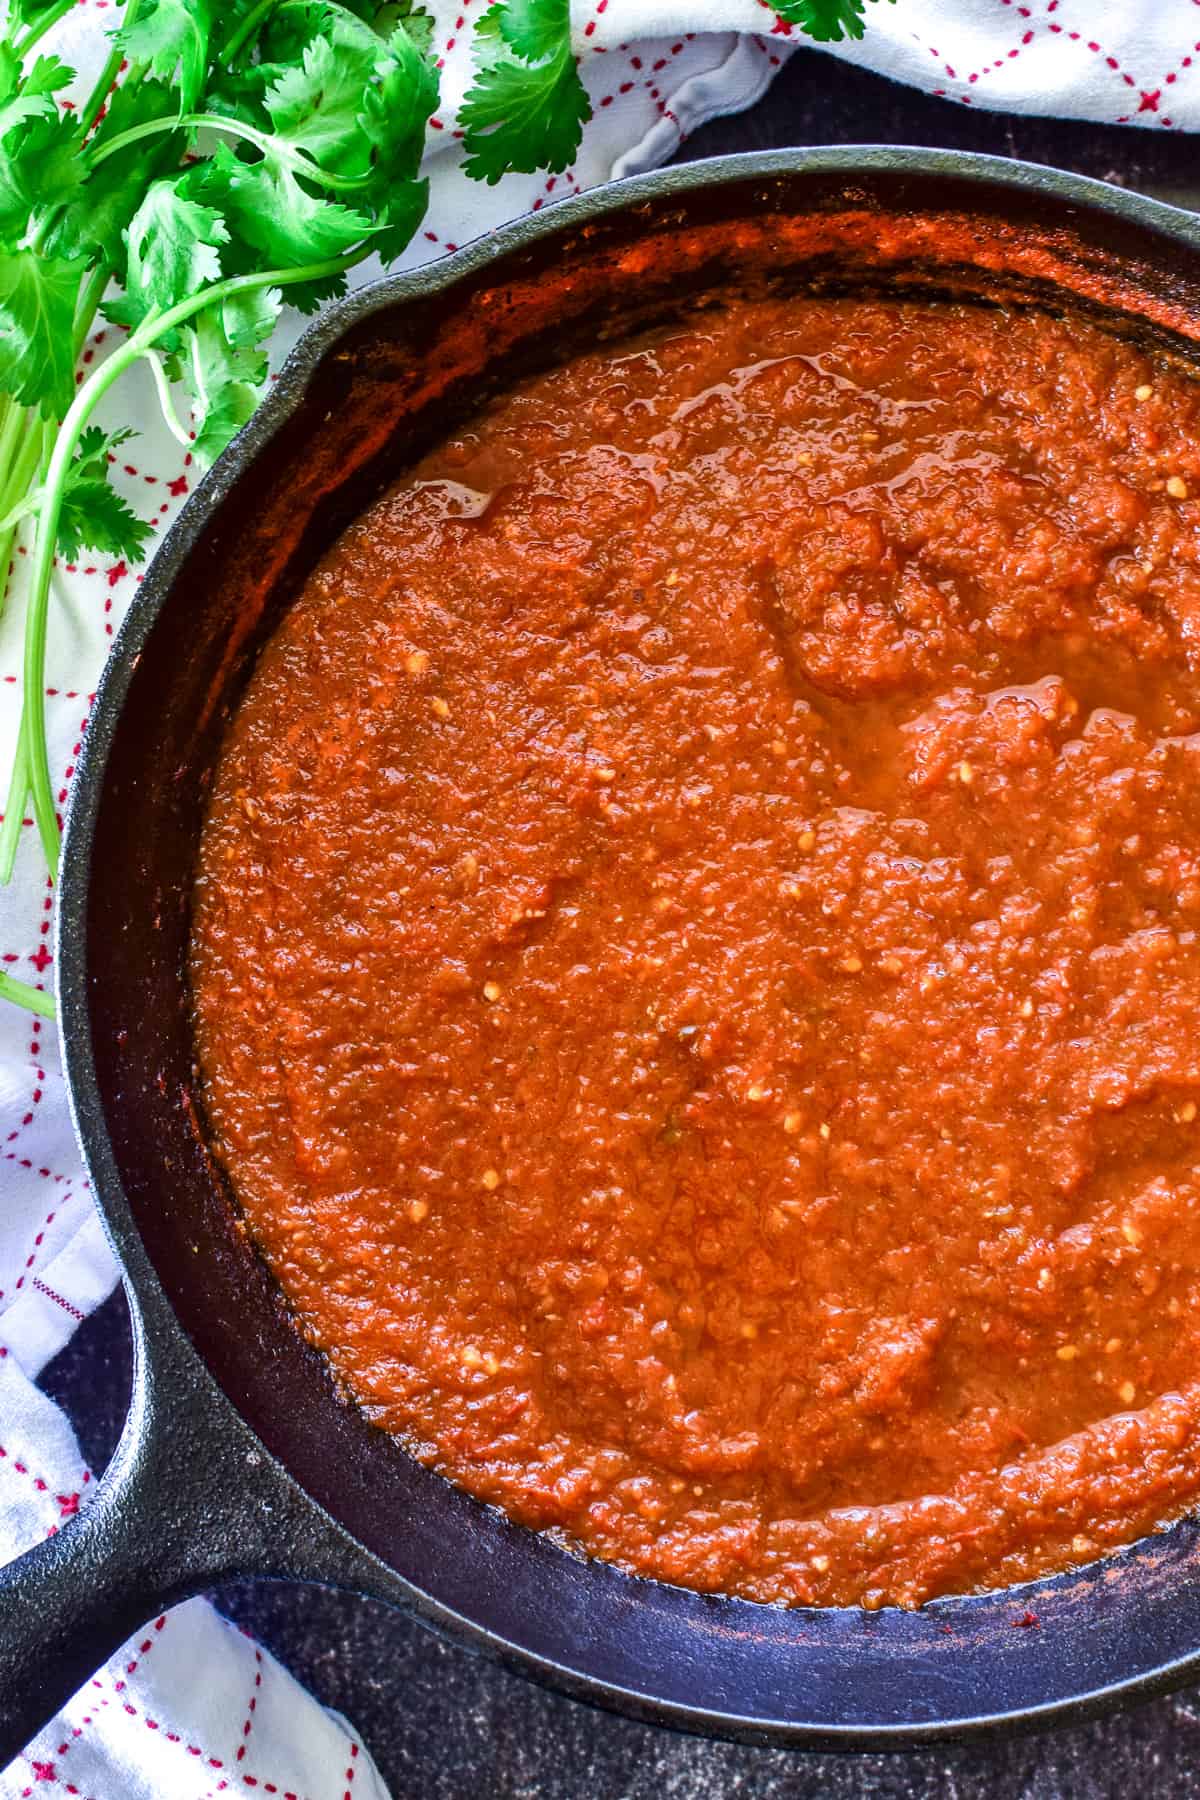 Chilaquile sauce in a cast iron skillet